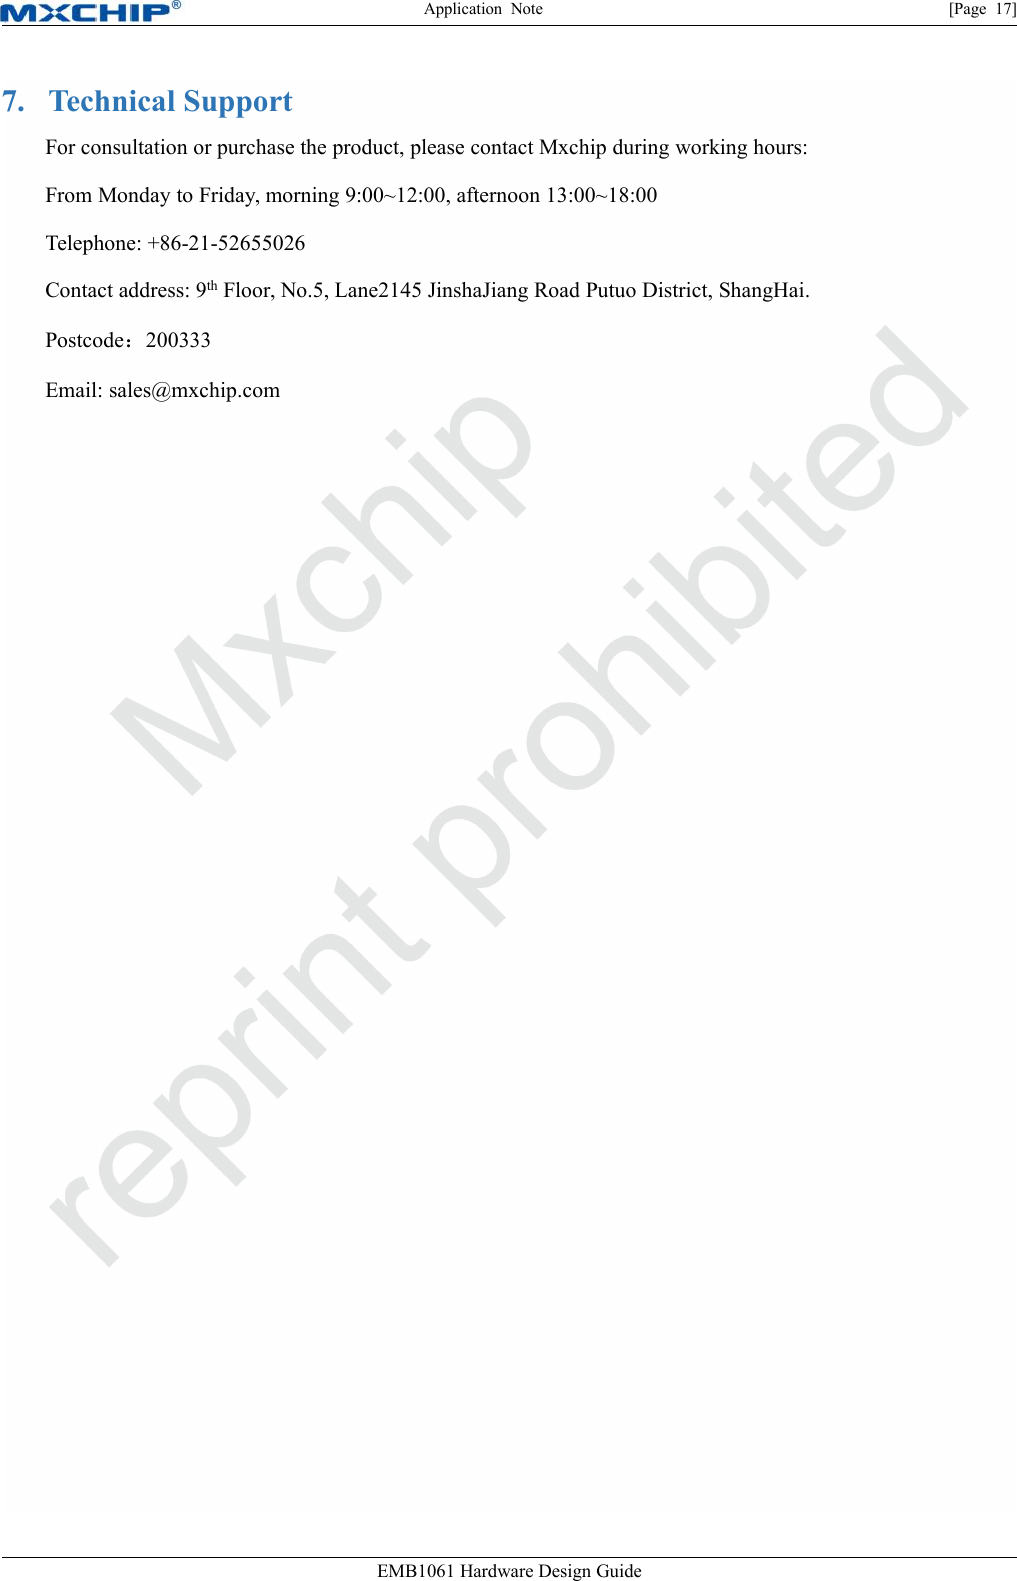 Application Note [Page 17]EMB1061 Hardware Design Guide7. Technical SupportFor consultation or purchase the product, please contact Mxchip during working hours:From Monday to Friday, morning 9:00~12:00, afternoon 13:00~18:00Telephone: +86-21-52655026Contact address: 9th Floor, No.5, Lane2145 JinshaJiang Road Putuo District, ShangHai.Postcode：200333Email: sales@mxchip.com